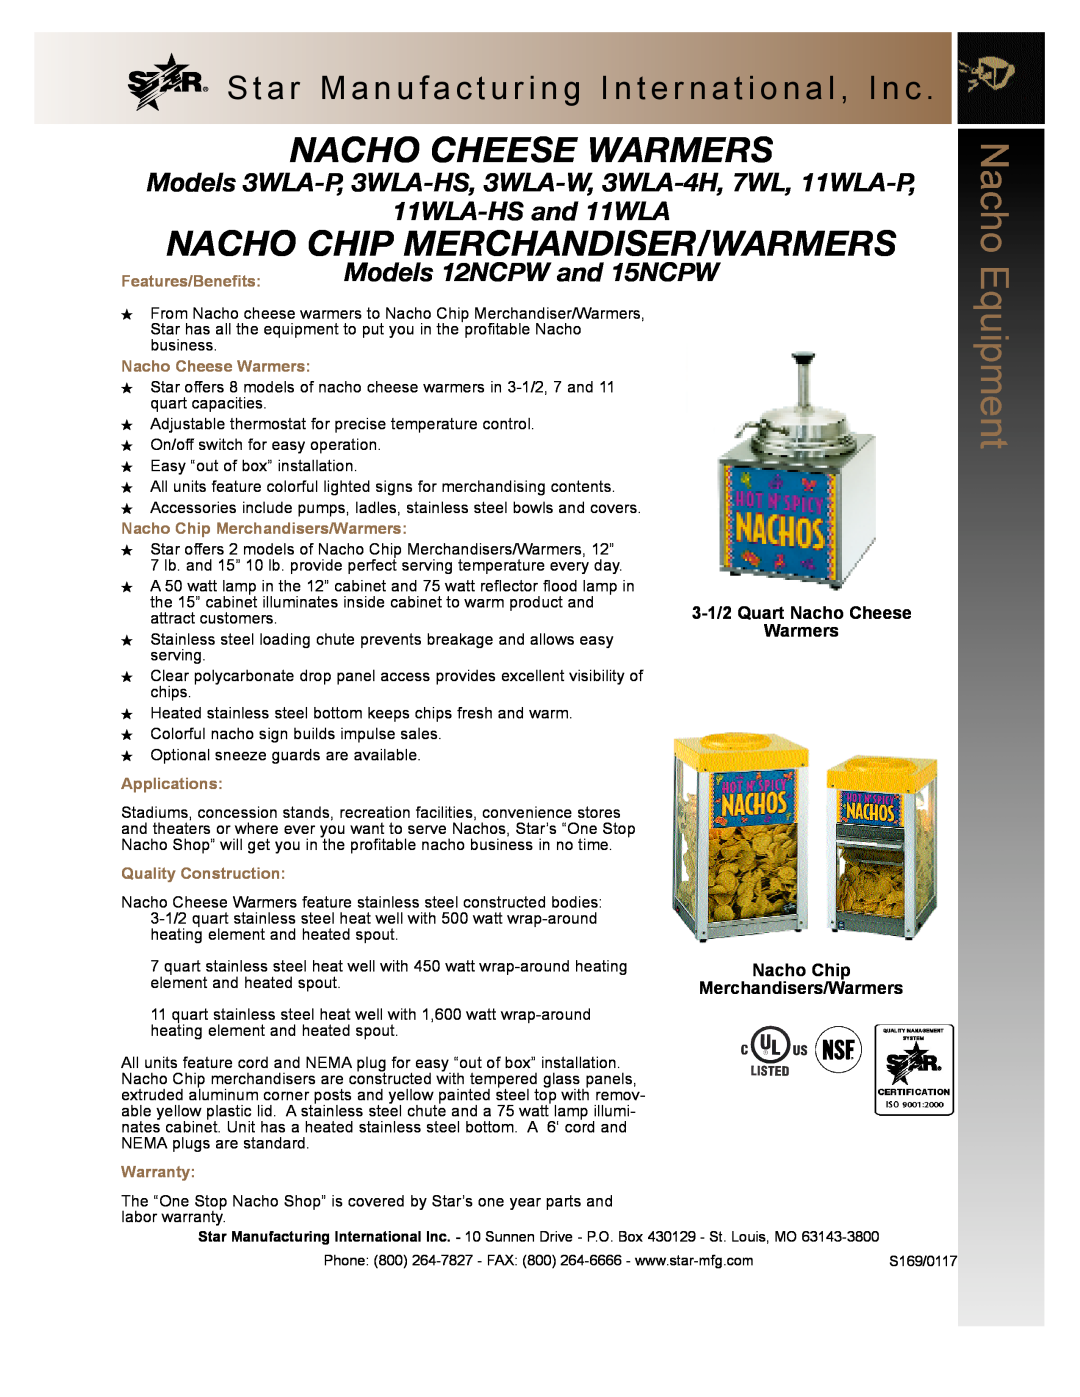 Star Manufacturing 12NCPW warranty Nacho Cheese Warmers, Nacho Chip Merchandiser/Warmers, 11WLA-HS and 11WLA, Applications 